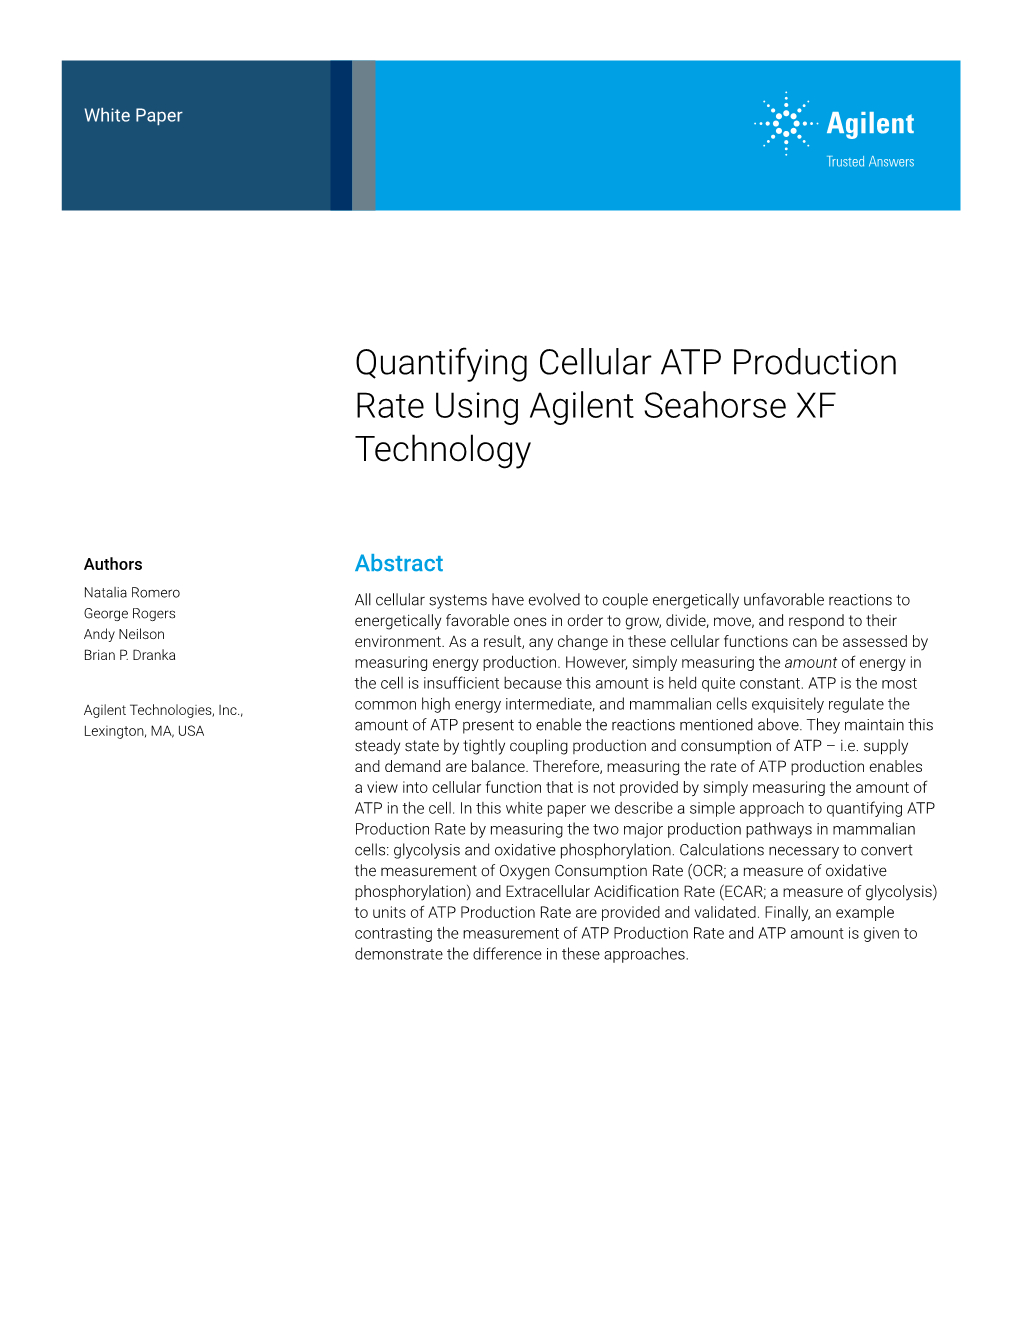 Quantifying Cellular ATP Production Rate Using Agilent Seahorse XF Technology